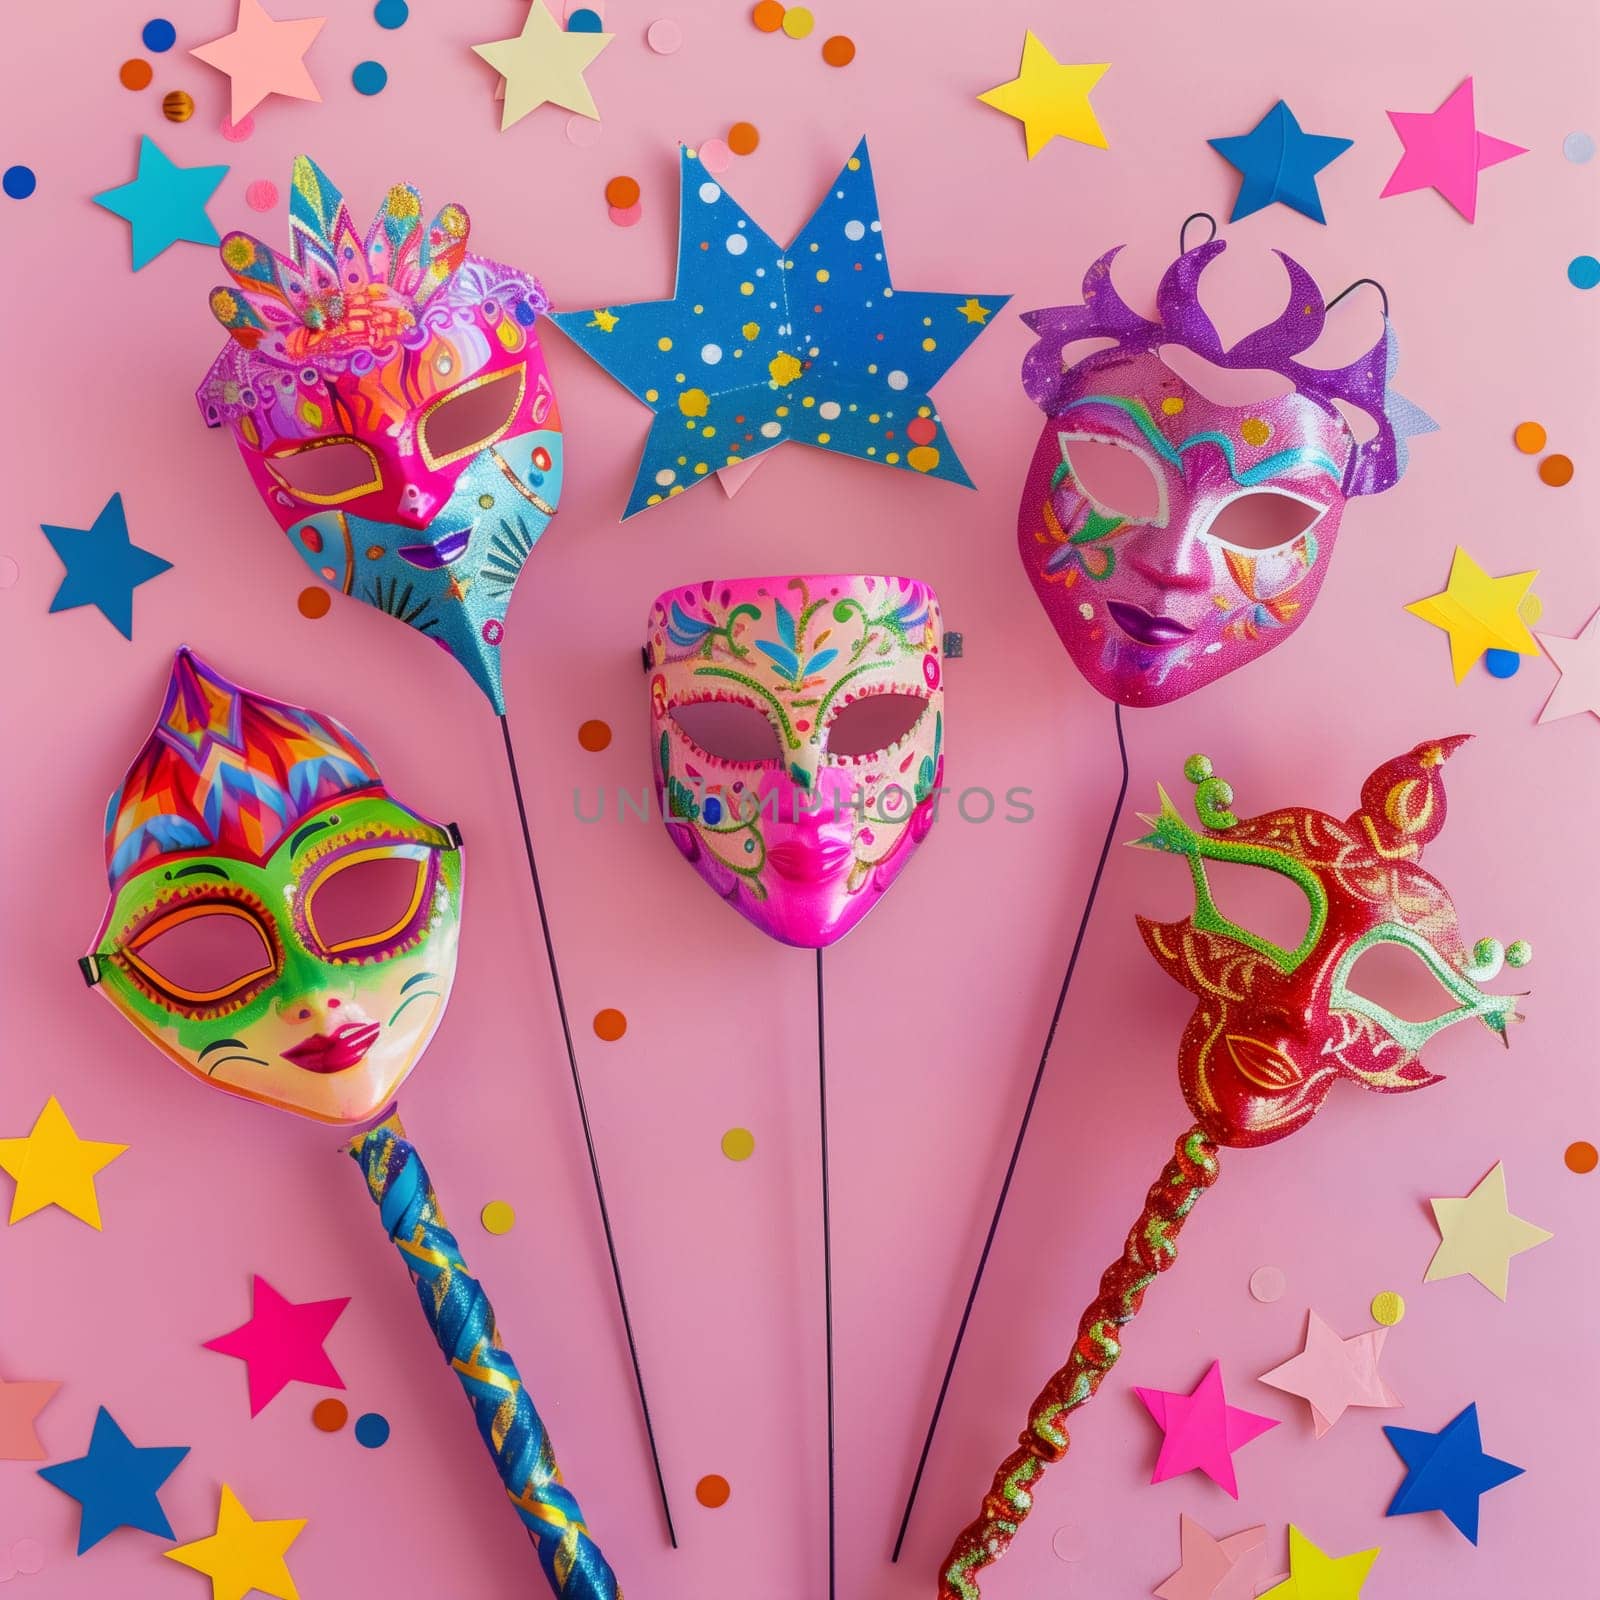 Five colorful masquerade masks on sticks, paper stars and scattered confetti on a pink background, flat lay close-up.